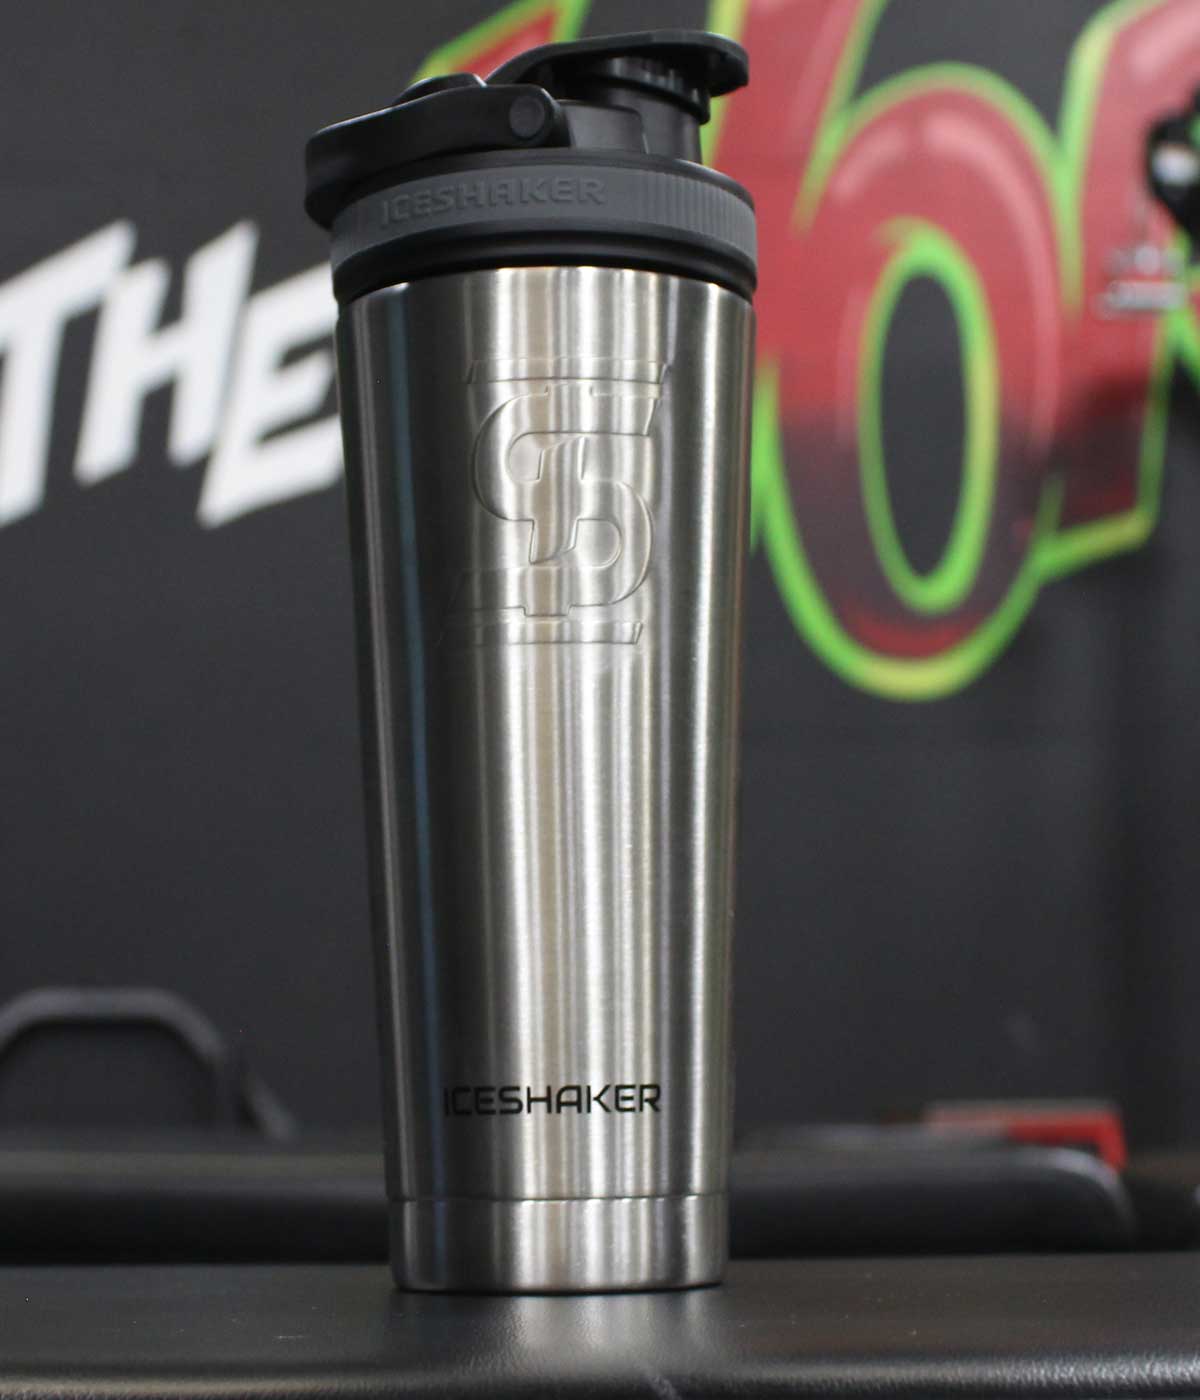 A close up view of the Stainless Steel colored 36oz Ice Shaker showing the front-view of the bottle.